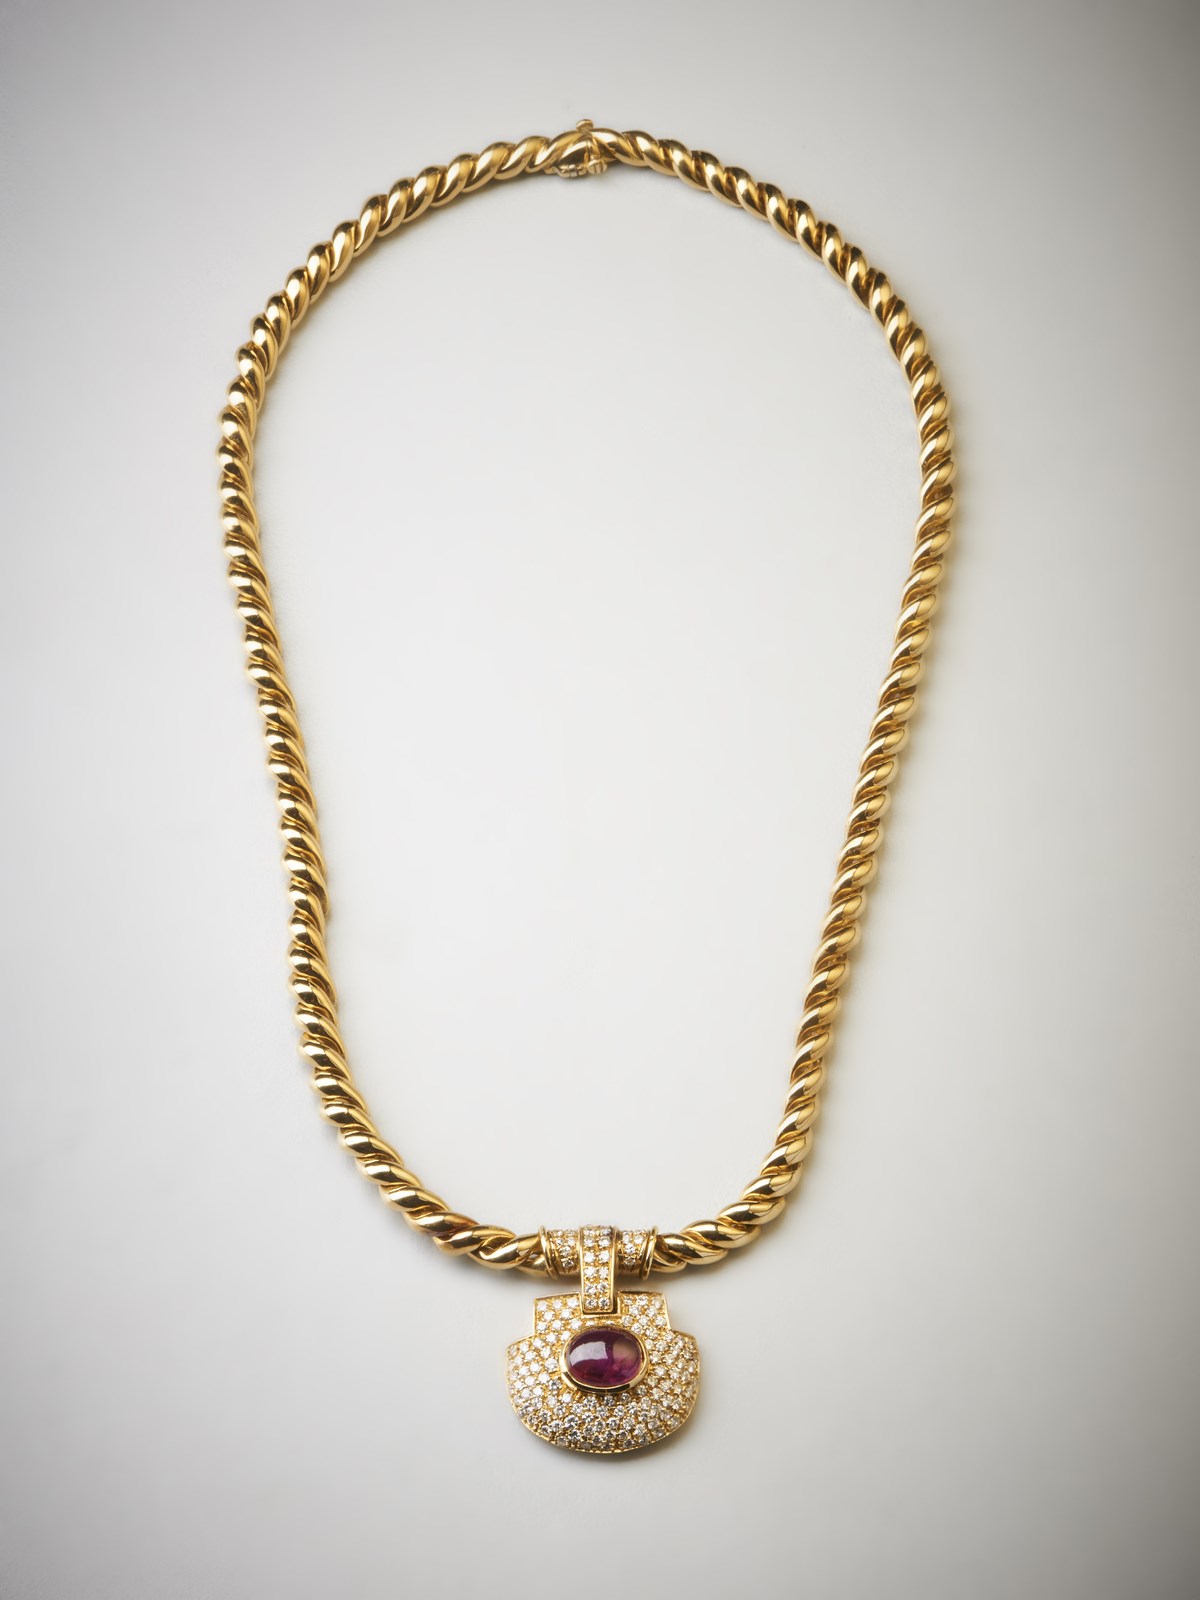 Necklace in yellow gold 750/1000 mesh intertwined with pendant with pavè of brilliant cut diamonds 2,80 carats approx. and oval cabochon ruby of about 4.50 carats. (Milan Kicin)